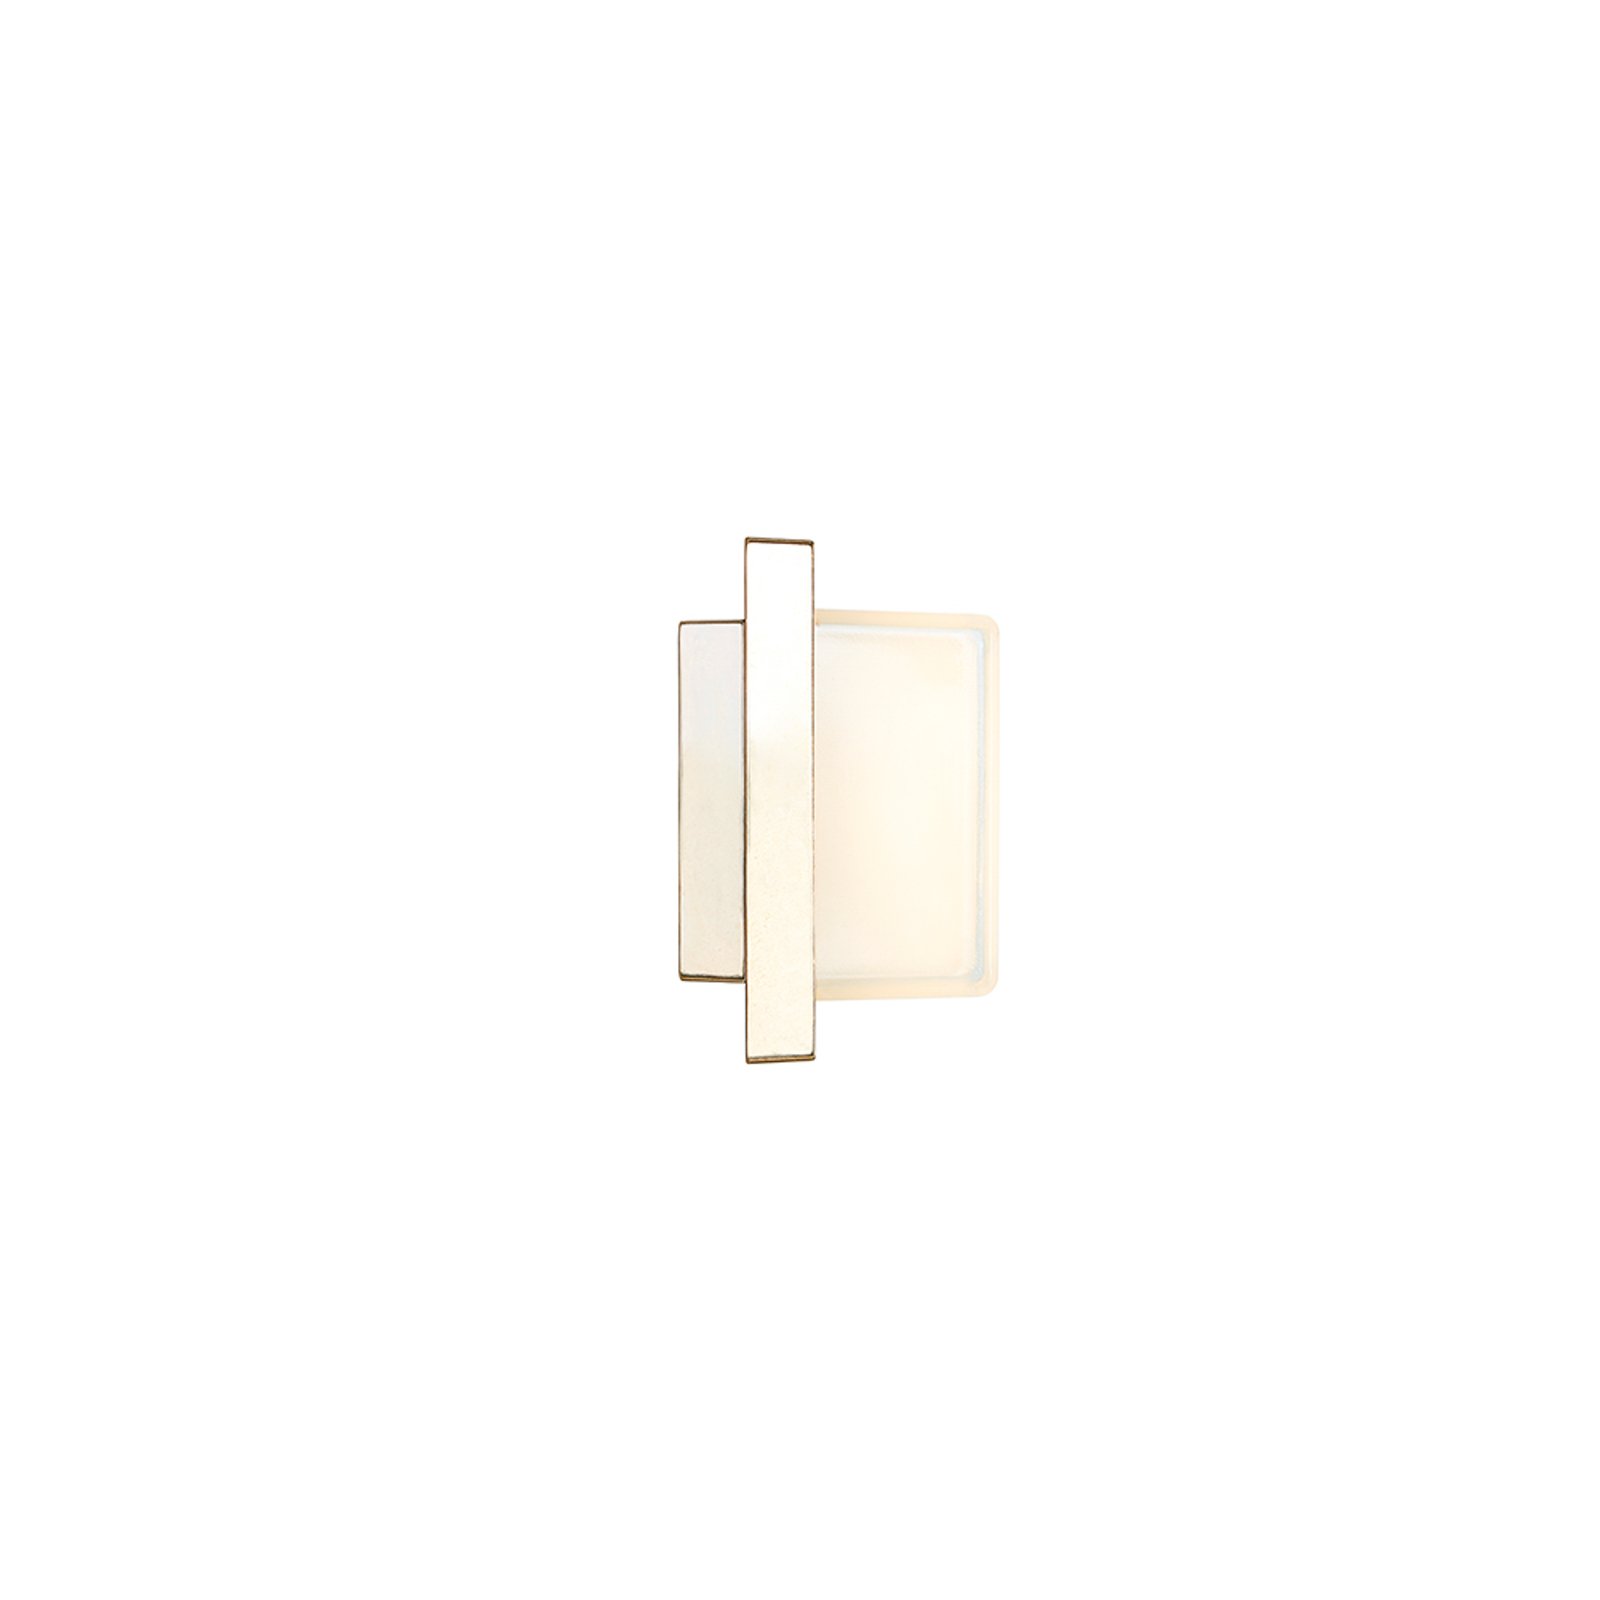 Ice Cubic 3403 LED wall light, natural brass